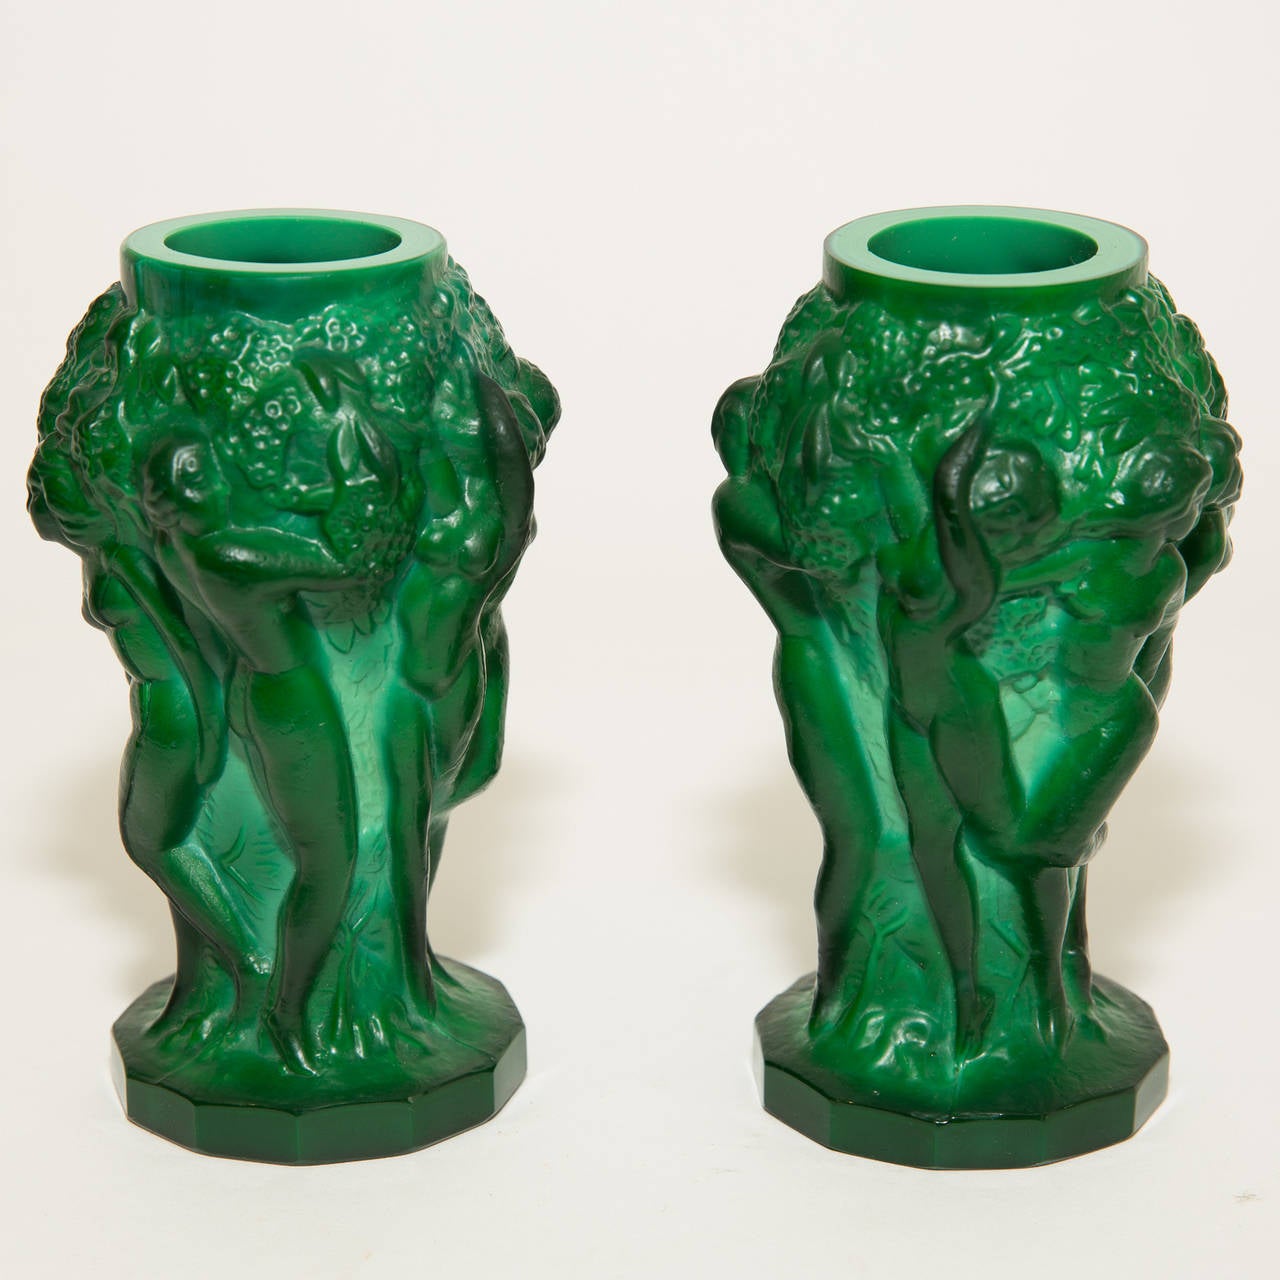 A pair of highly decorative malachite glass vases made by Heinrich Hoffmann ( Bohemia 1875-1939) in the early 1930's. Listed in his catalogue of works as 